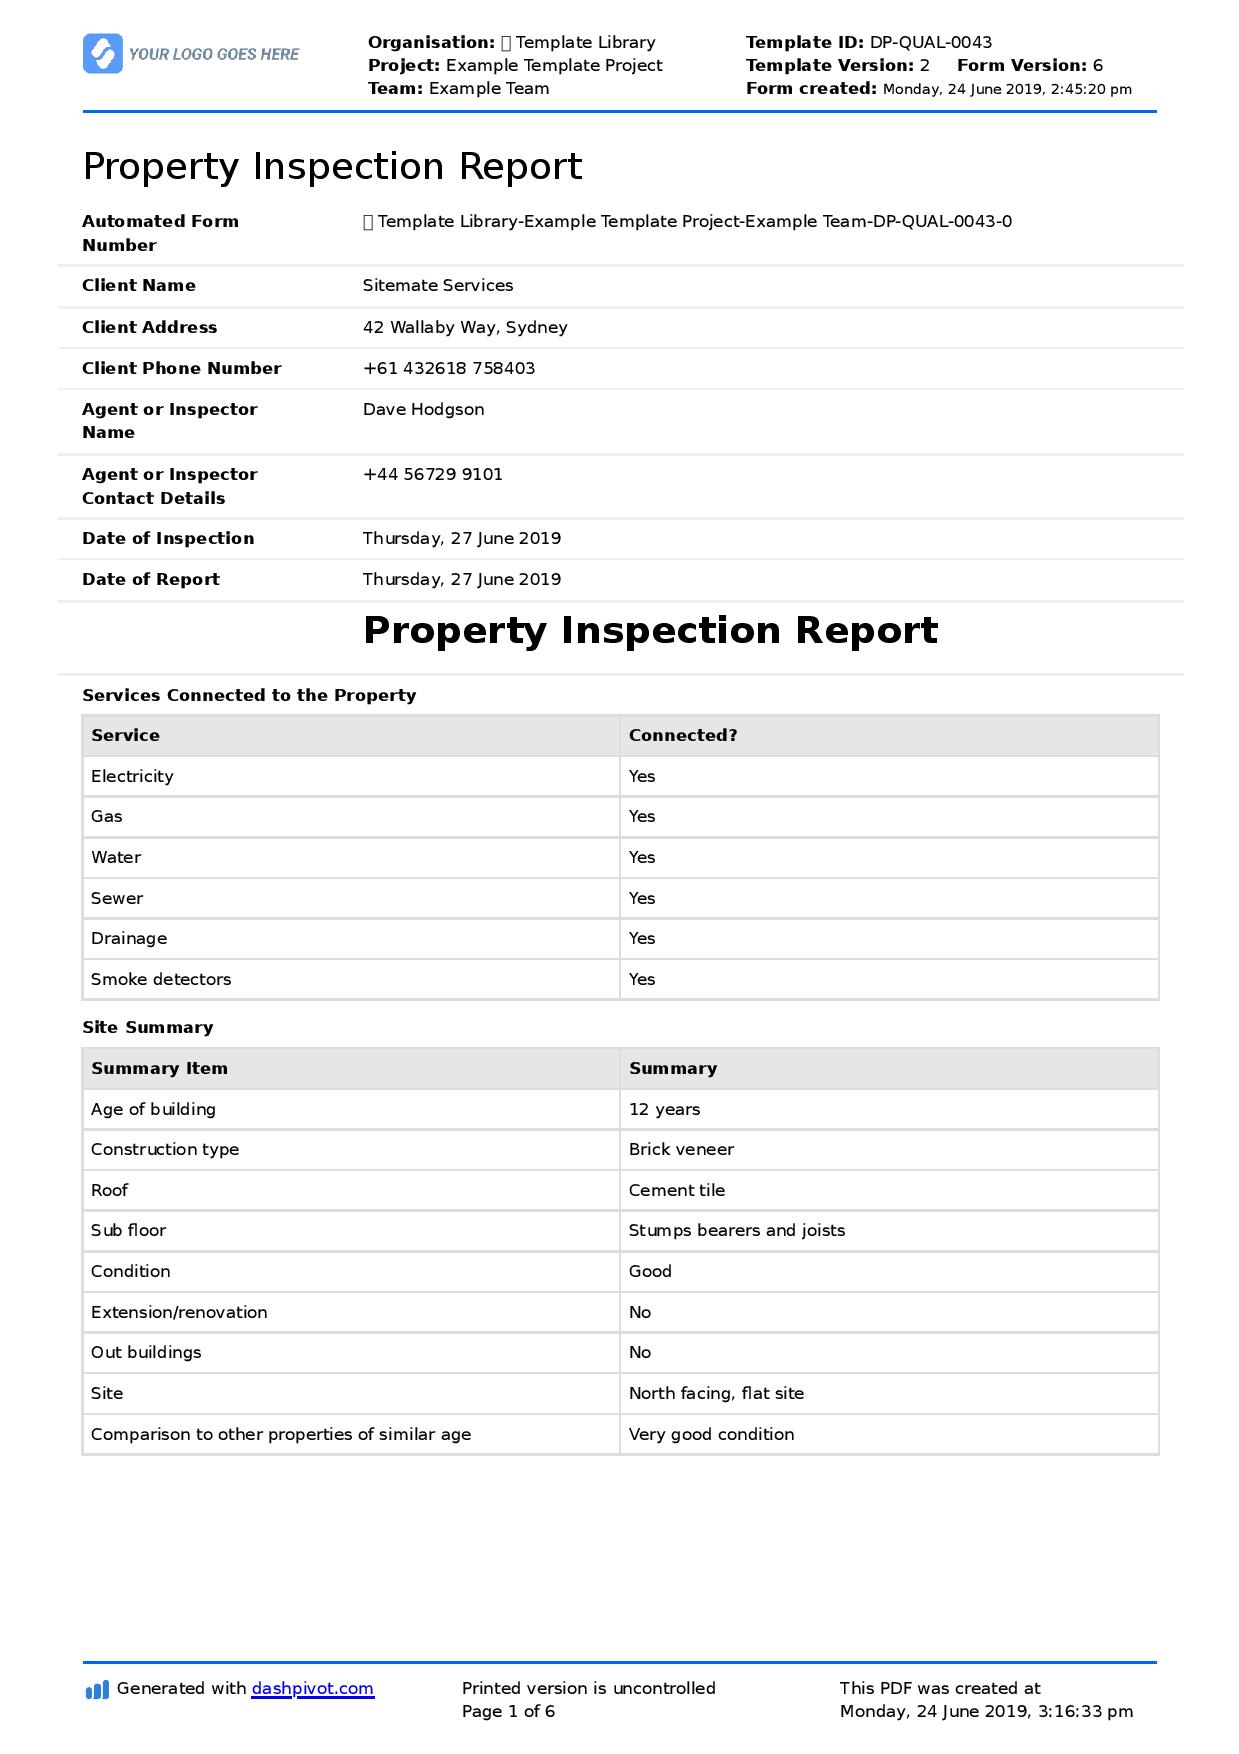 Property Inspection Report template (Free and customisable) For Home Inspection Report Template Pdf